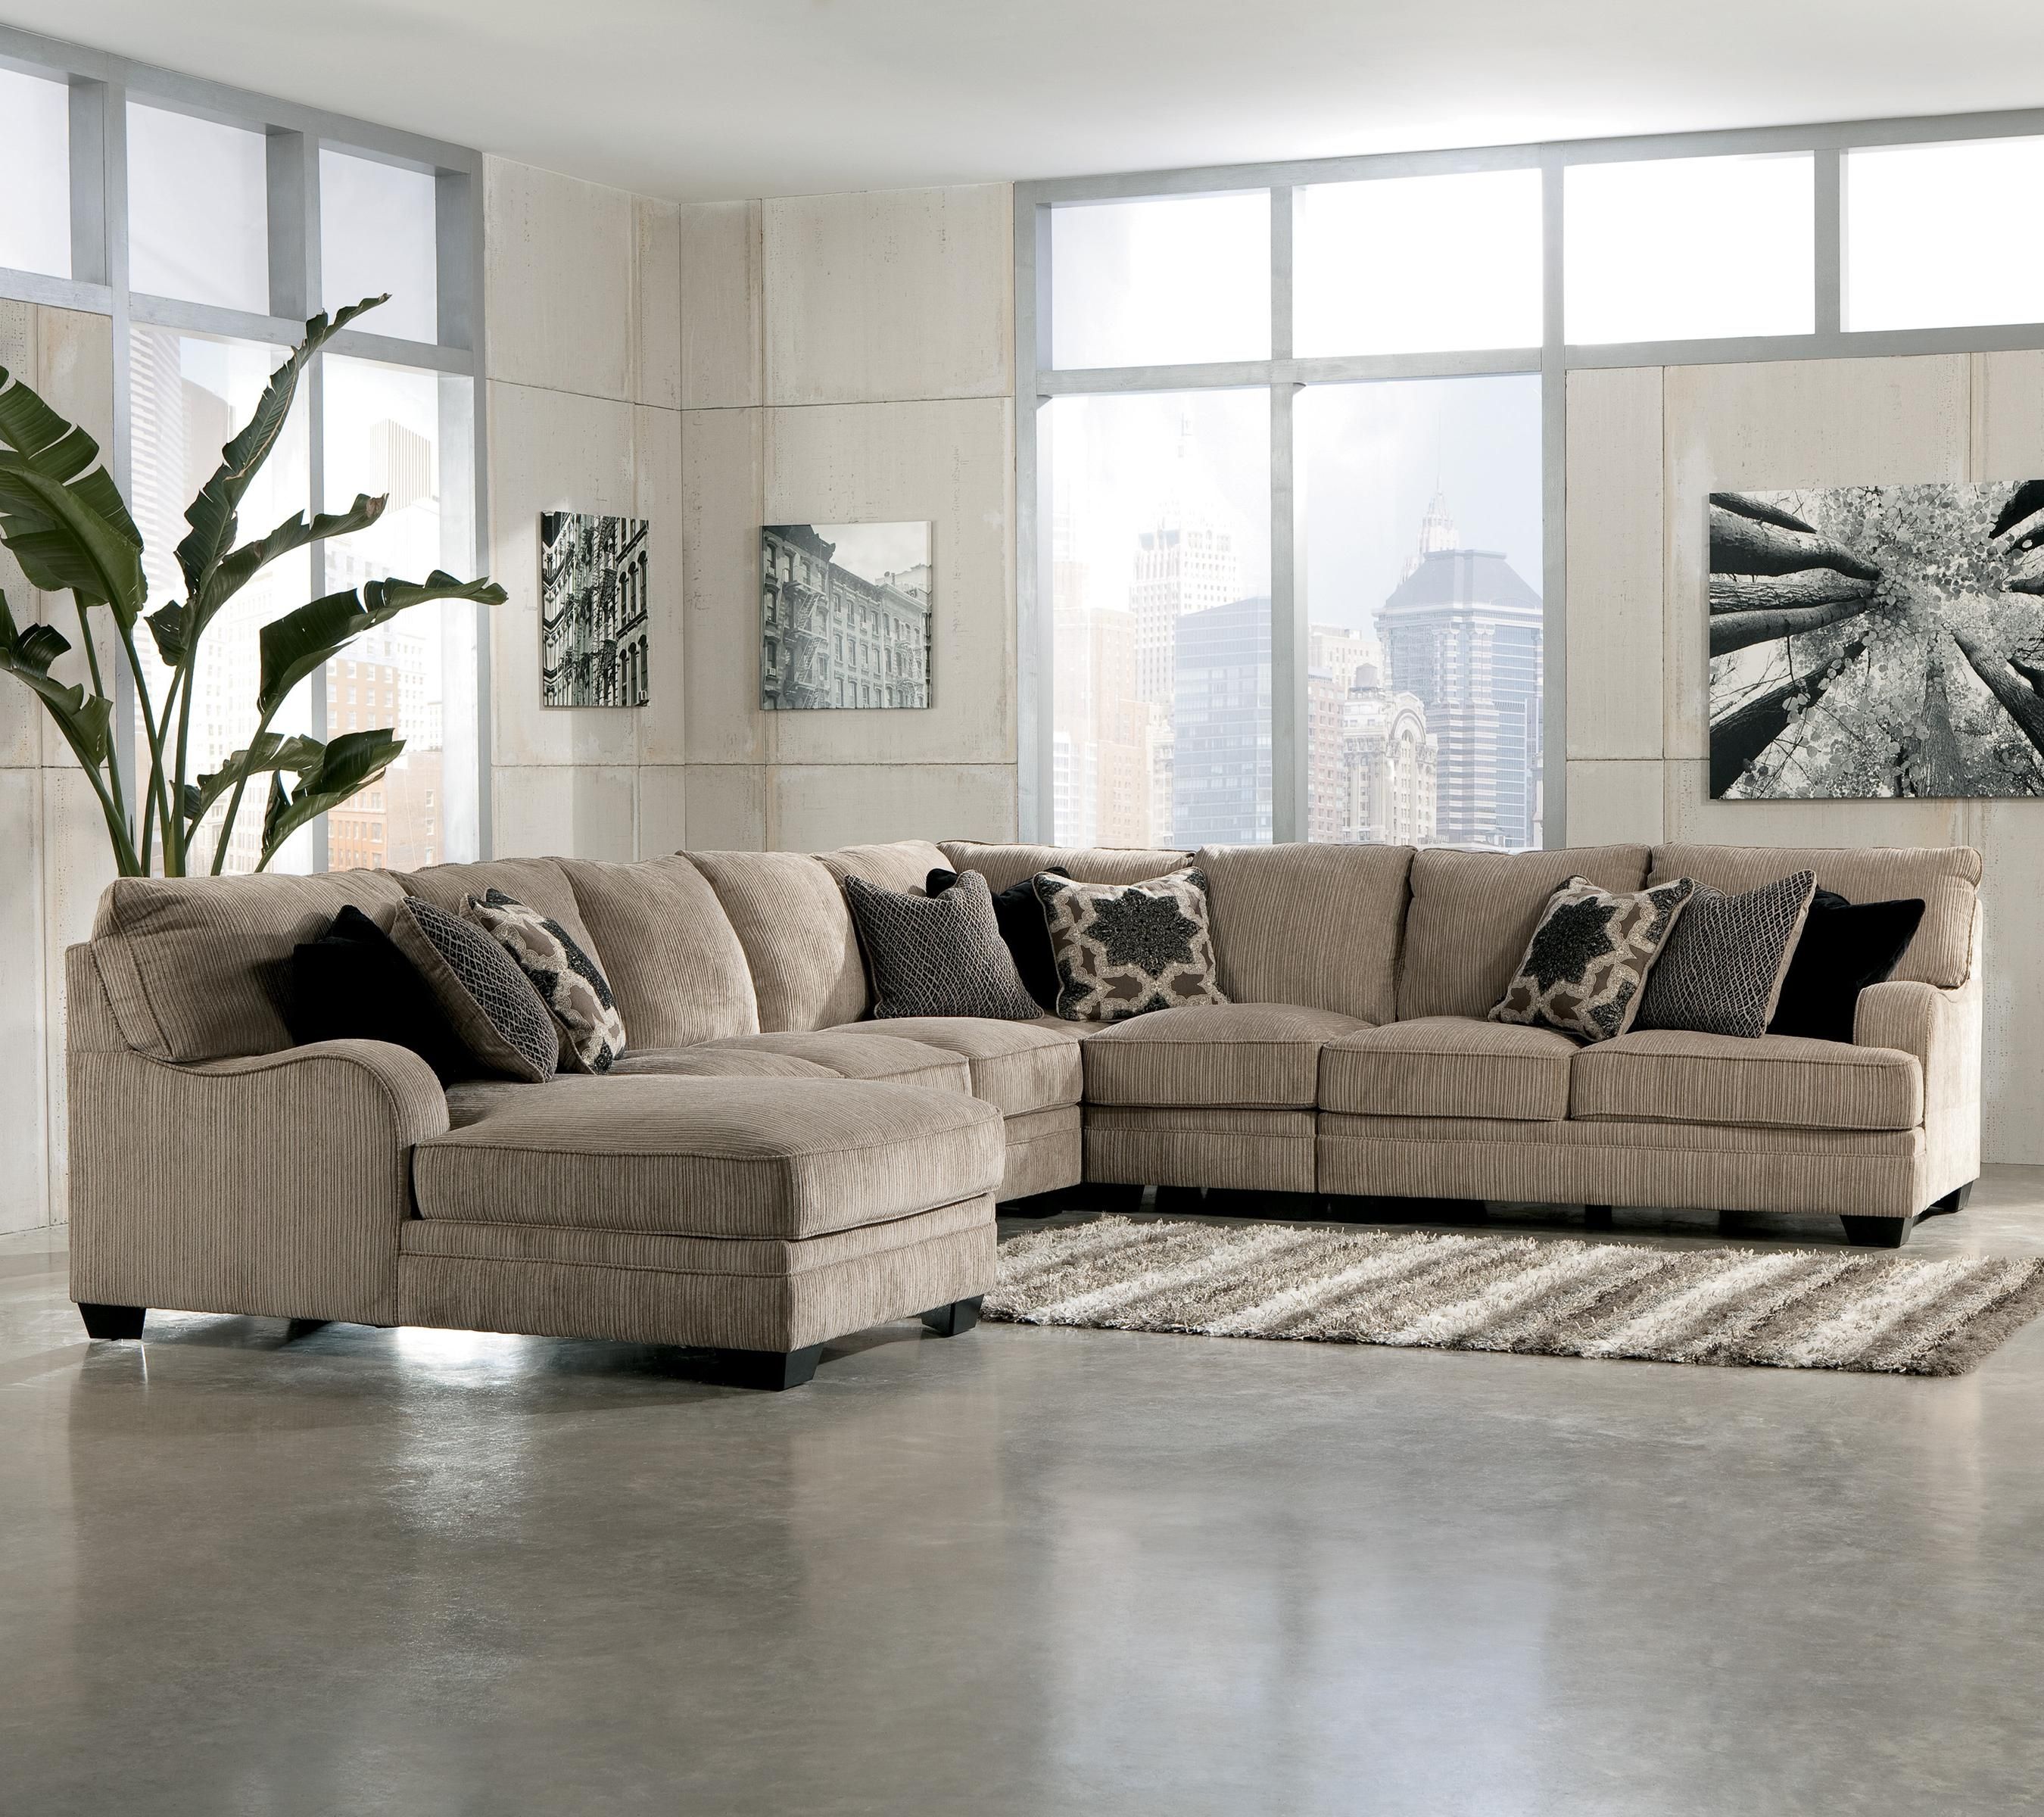 12 Best Ideas of 3 Piece Sectional Sofa Slipcovers